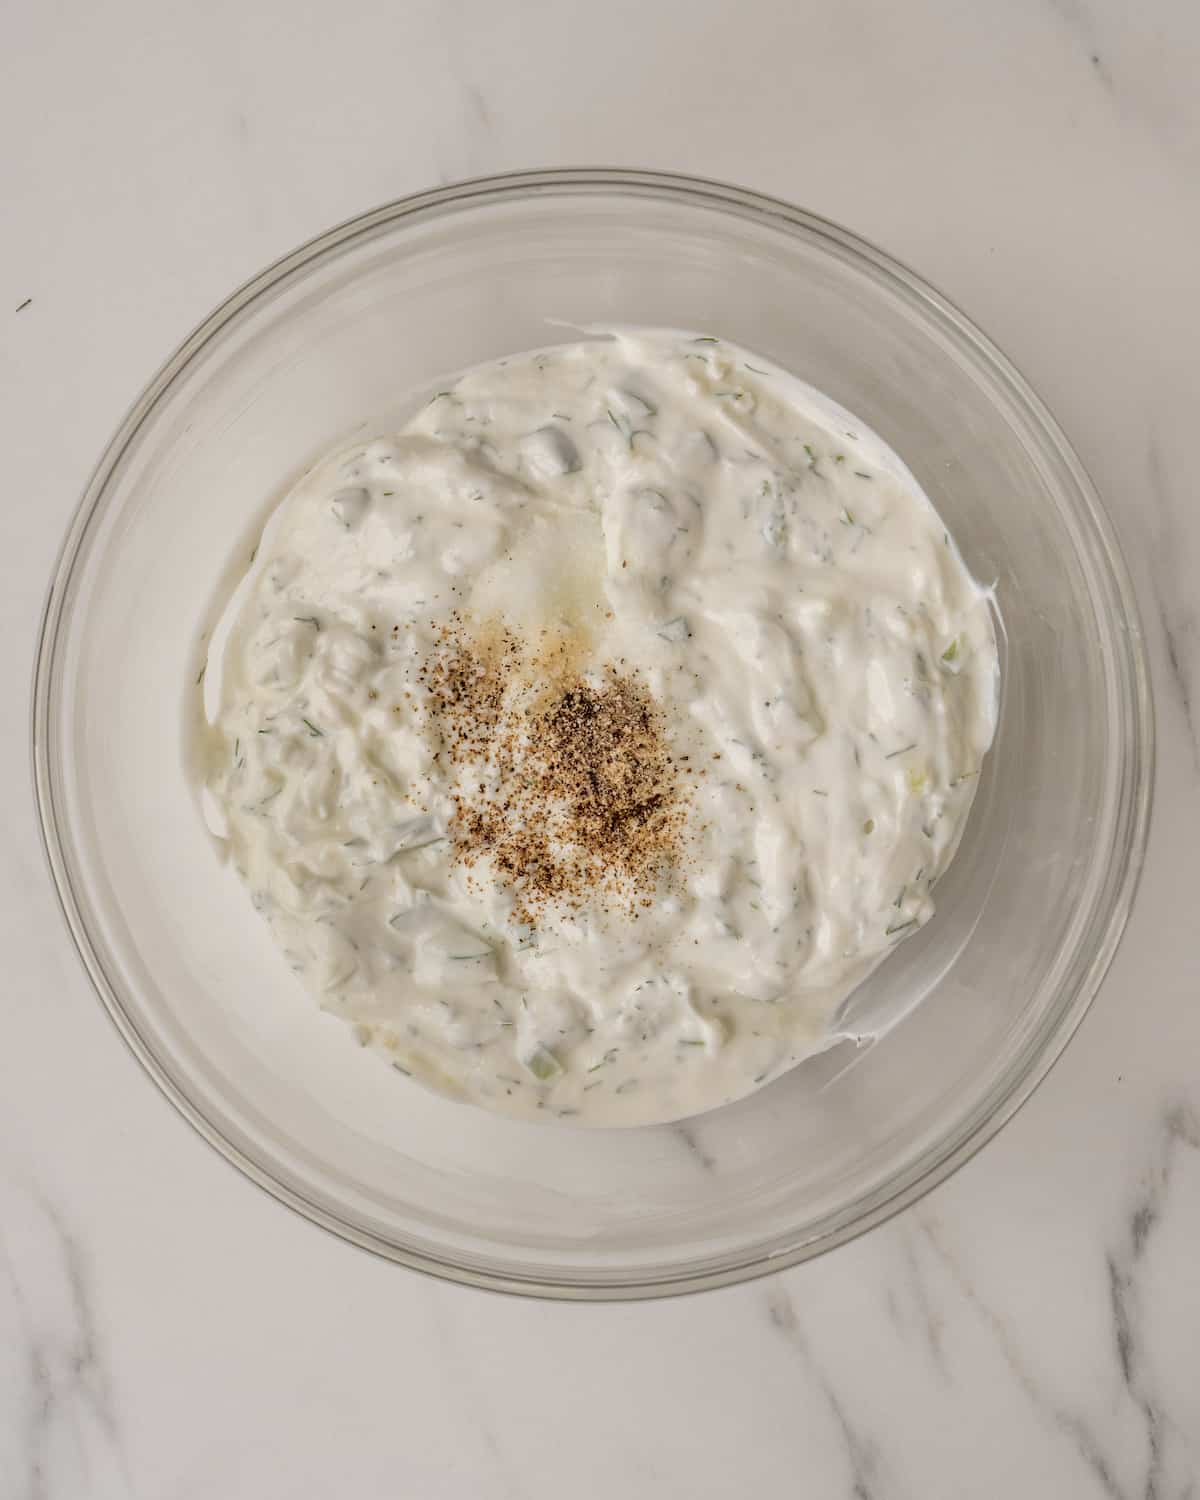 A mixing bowl with tzatziki sauce topped with salt and pepper.